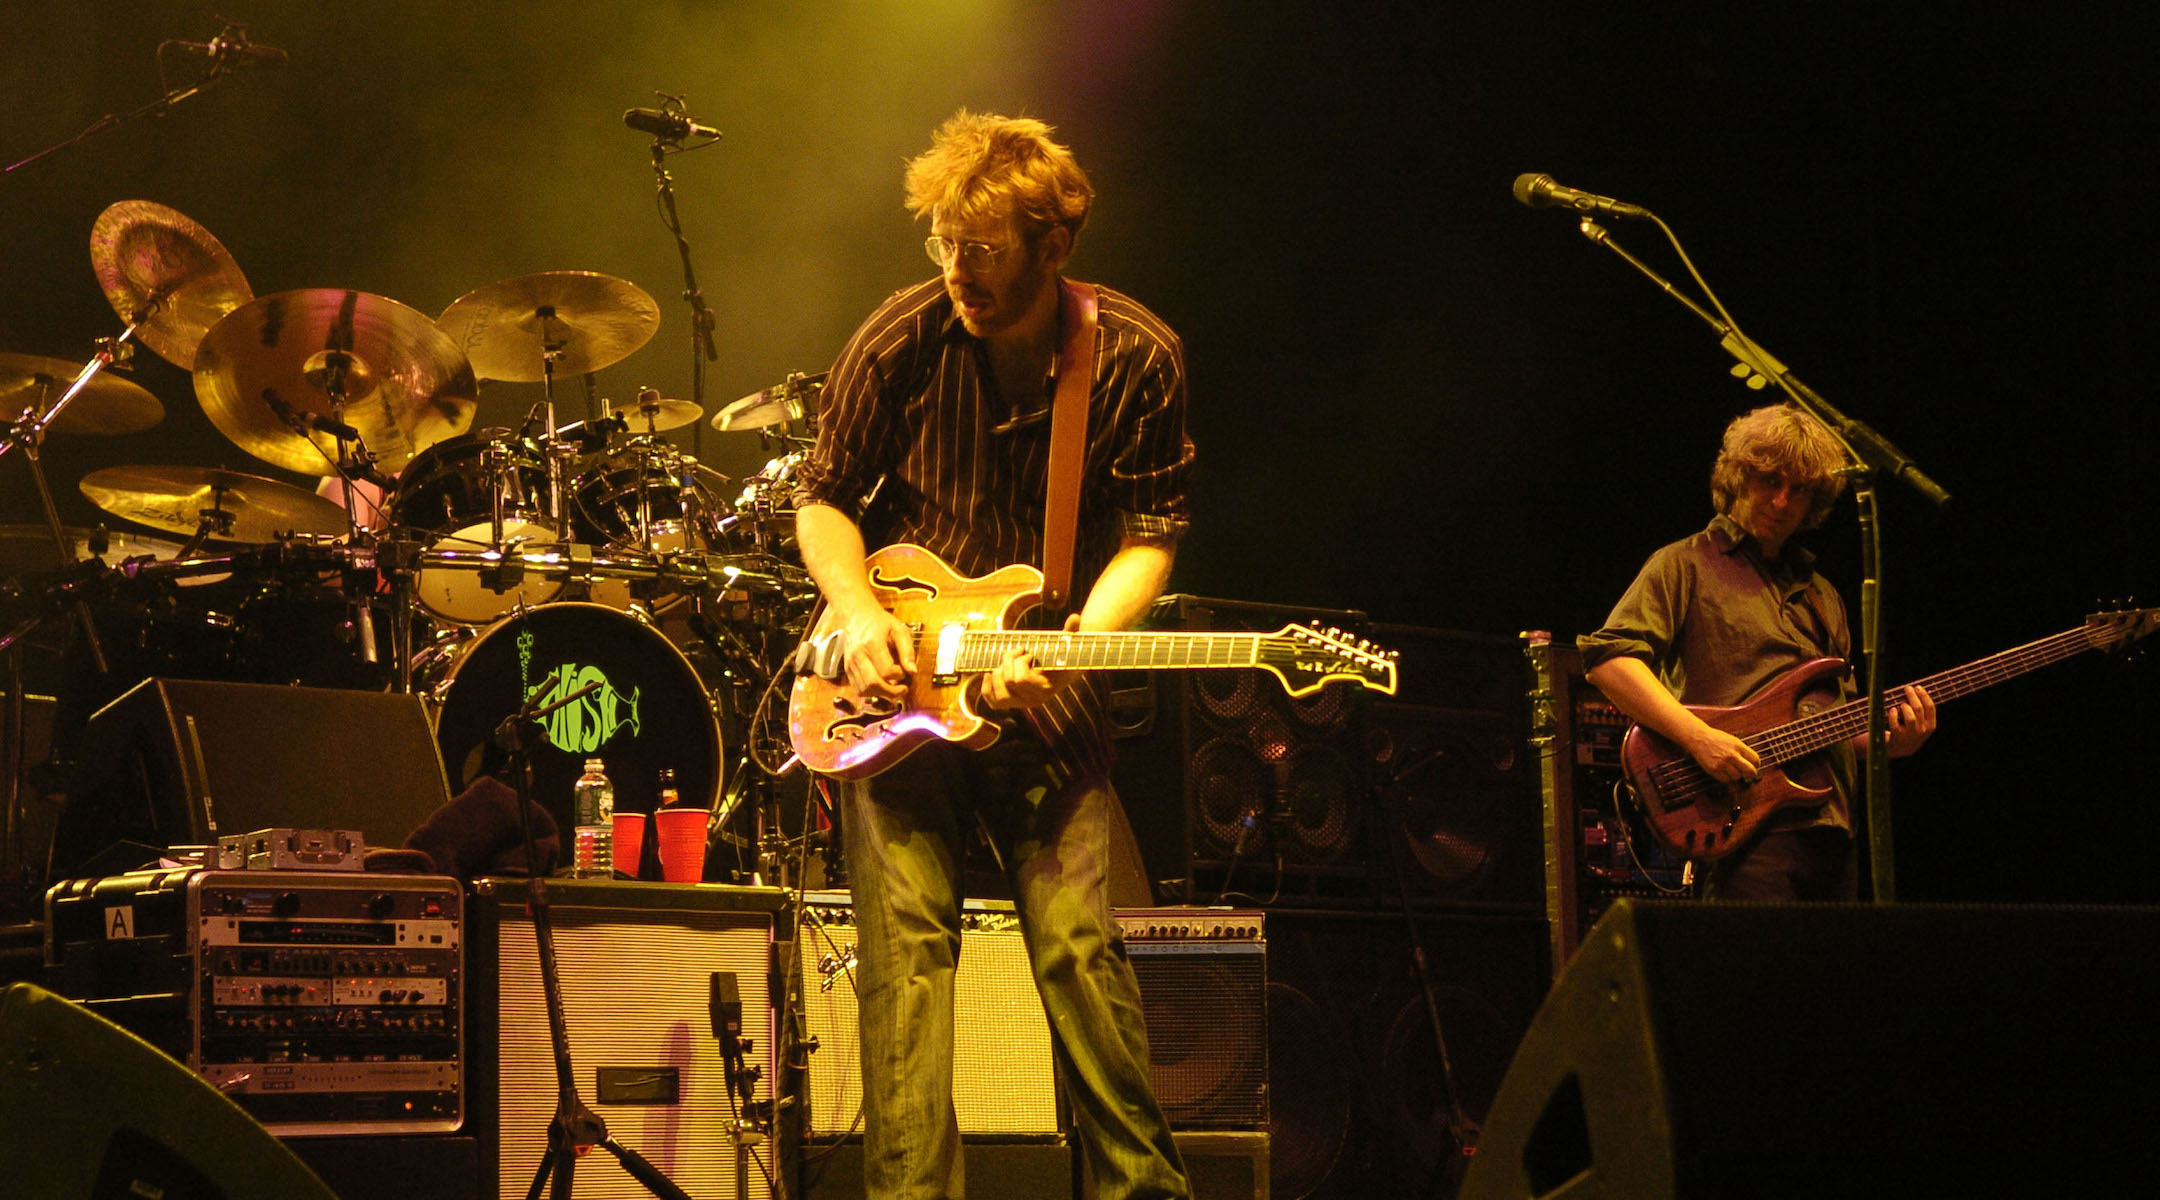 Phish, shown performing in 2004, have cultivated a following that tracks them with religious fervor. (Jeff Kravitz/FilmMagic)